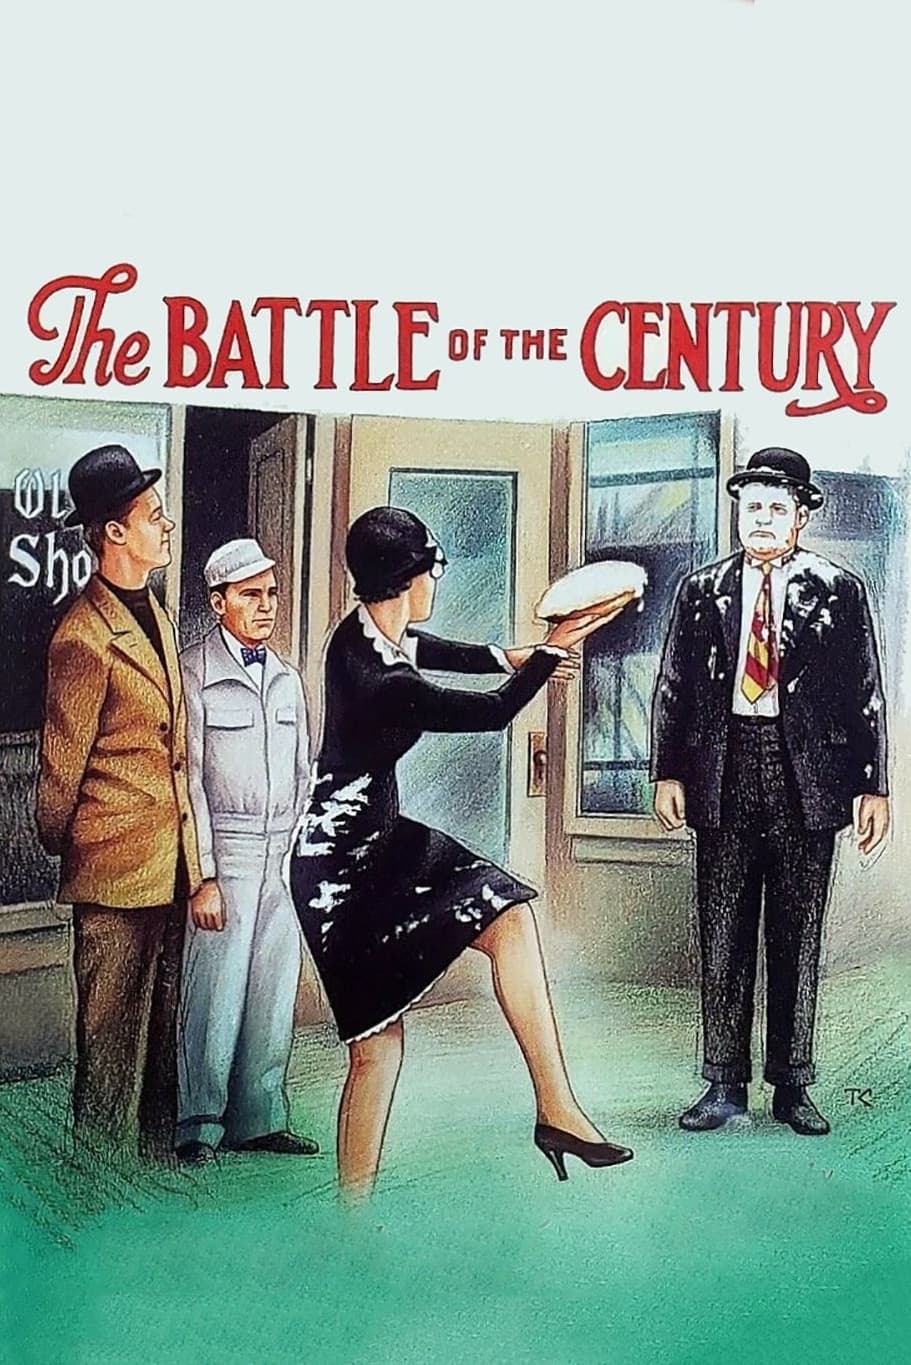 The Battle of the Century (1927)